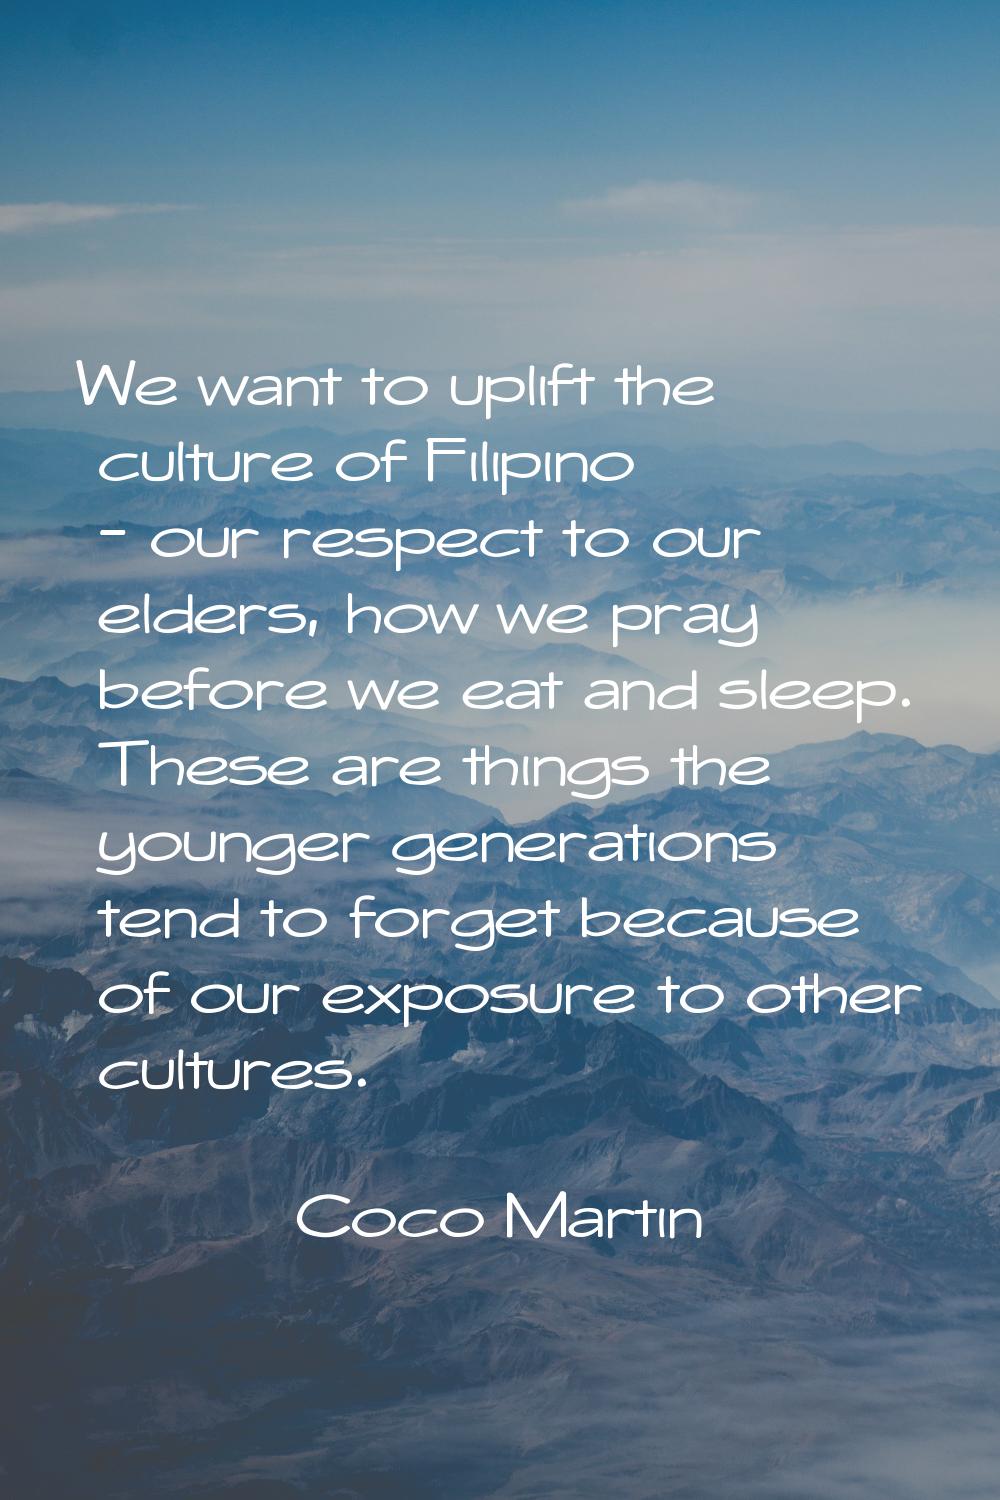 We want to uplift the culture of Filipino - our respect to our elders, how we pray before we eat an